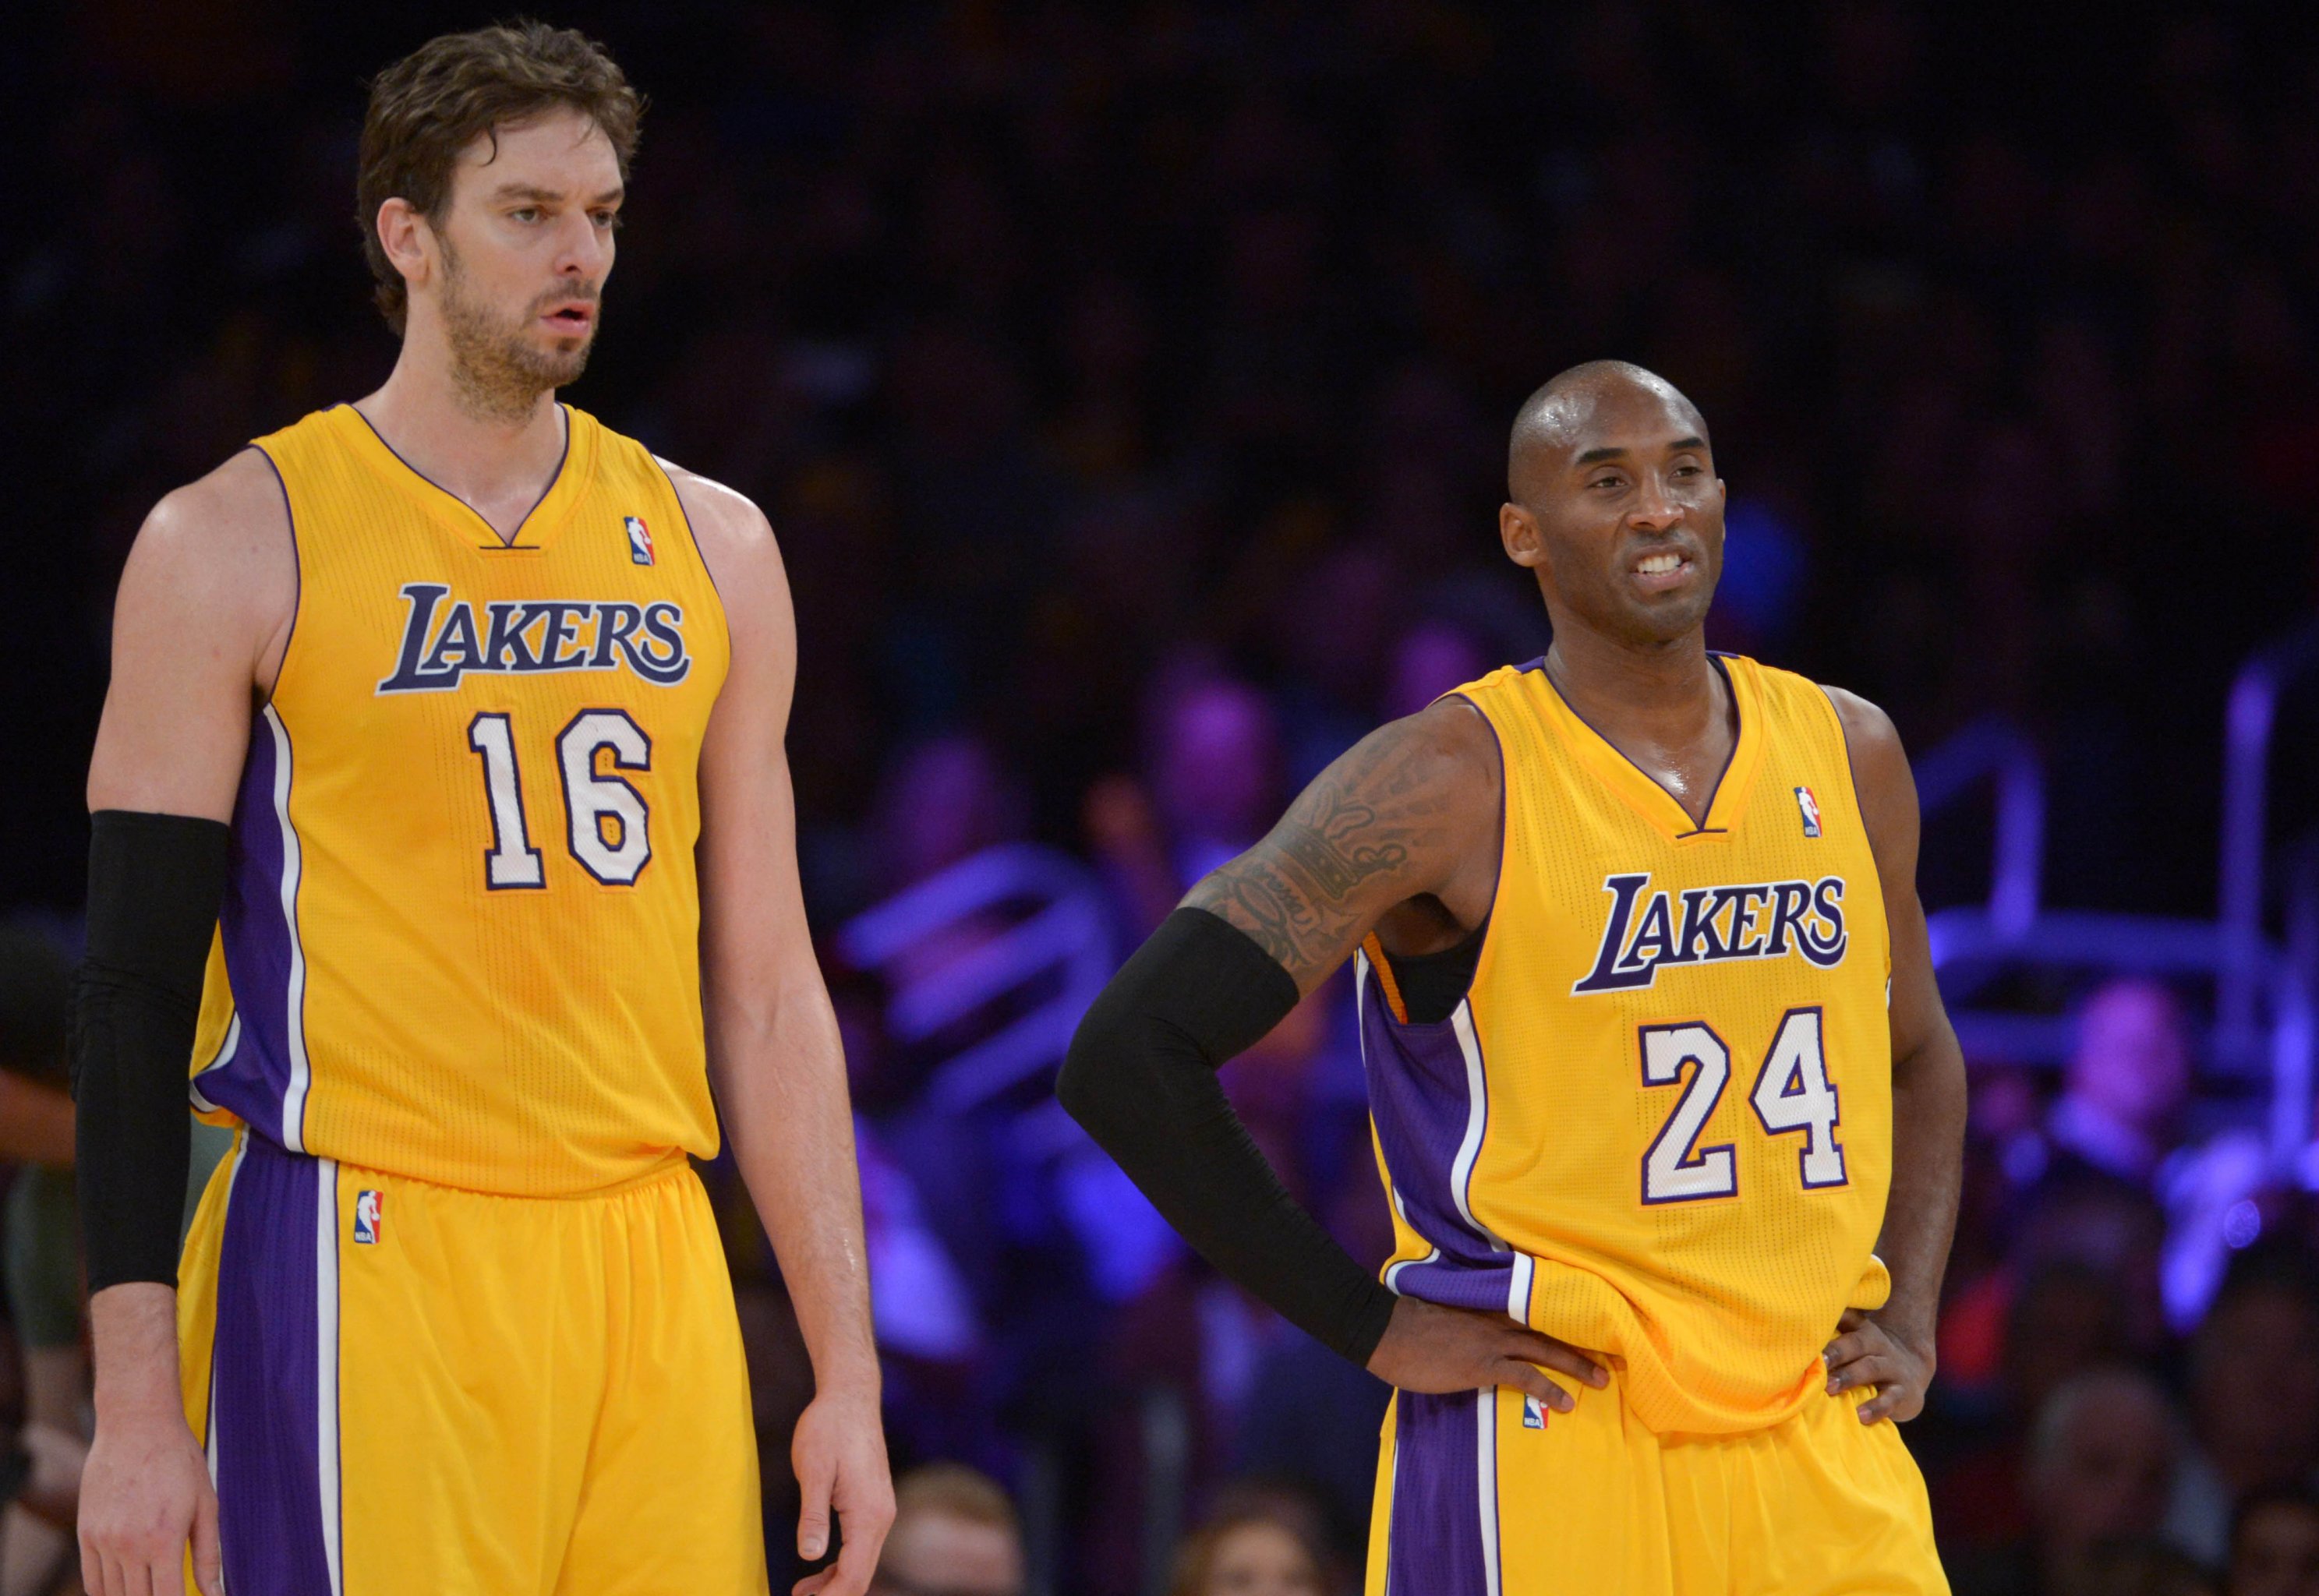 Gasol on a return to the LA Lakers: It wouldn't be bad